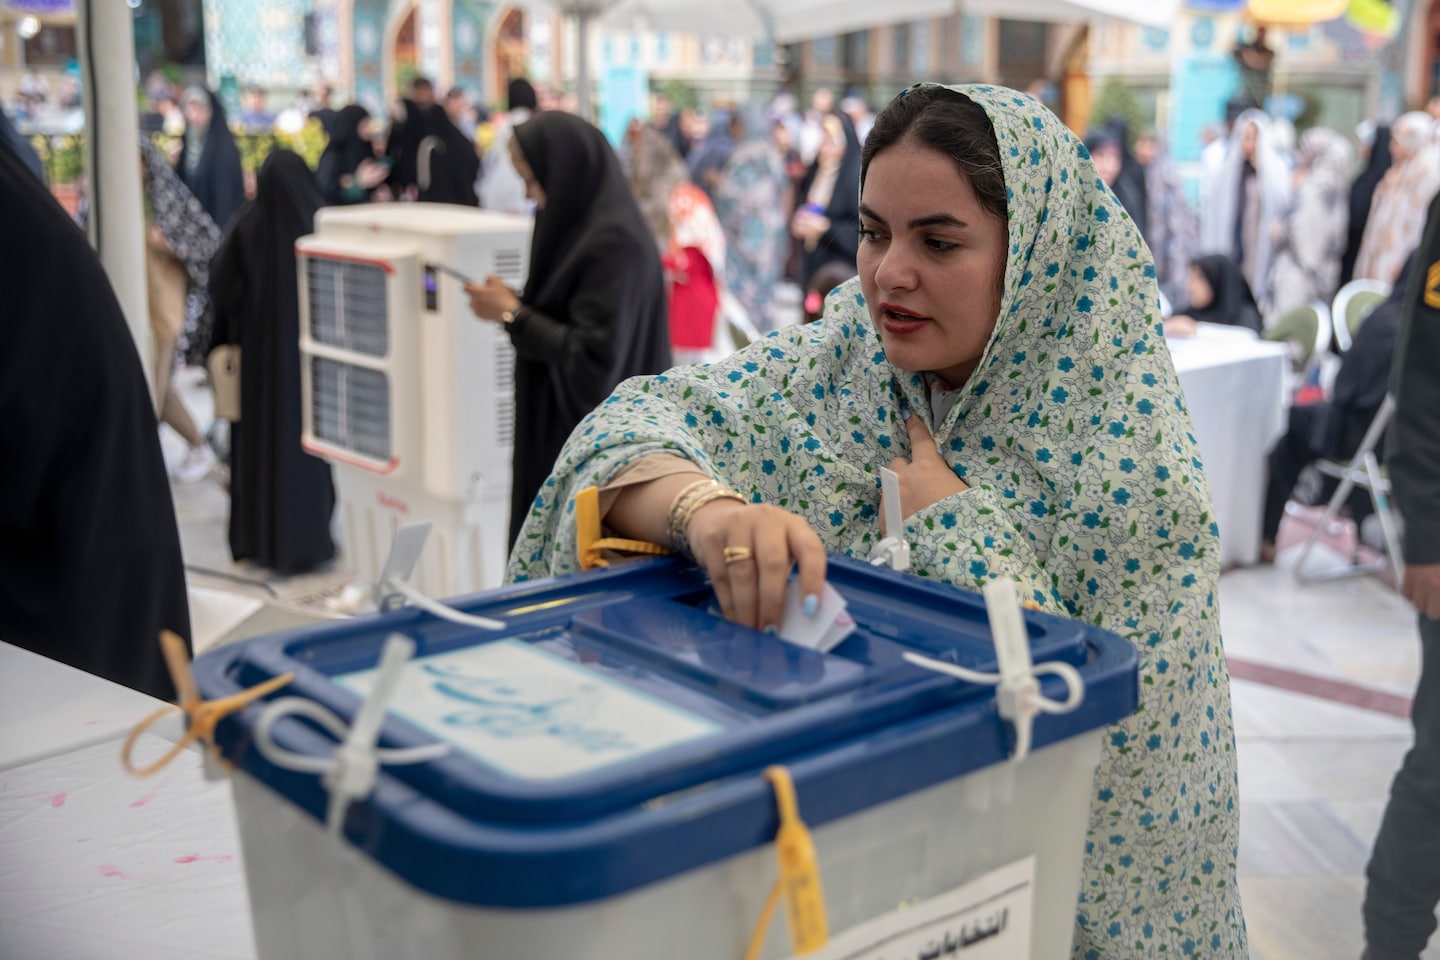 Iran election goes to runoff between reformist and conservative